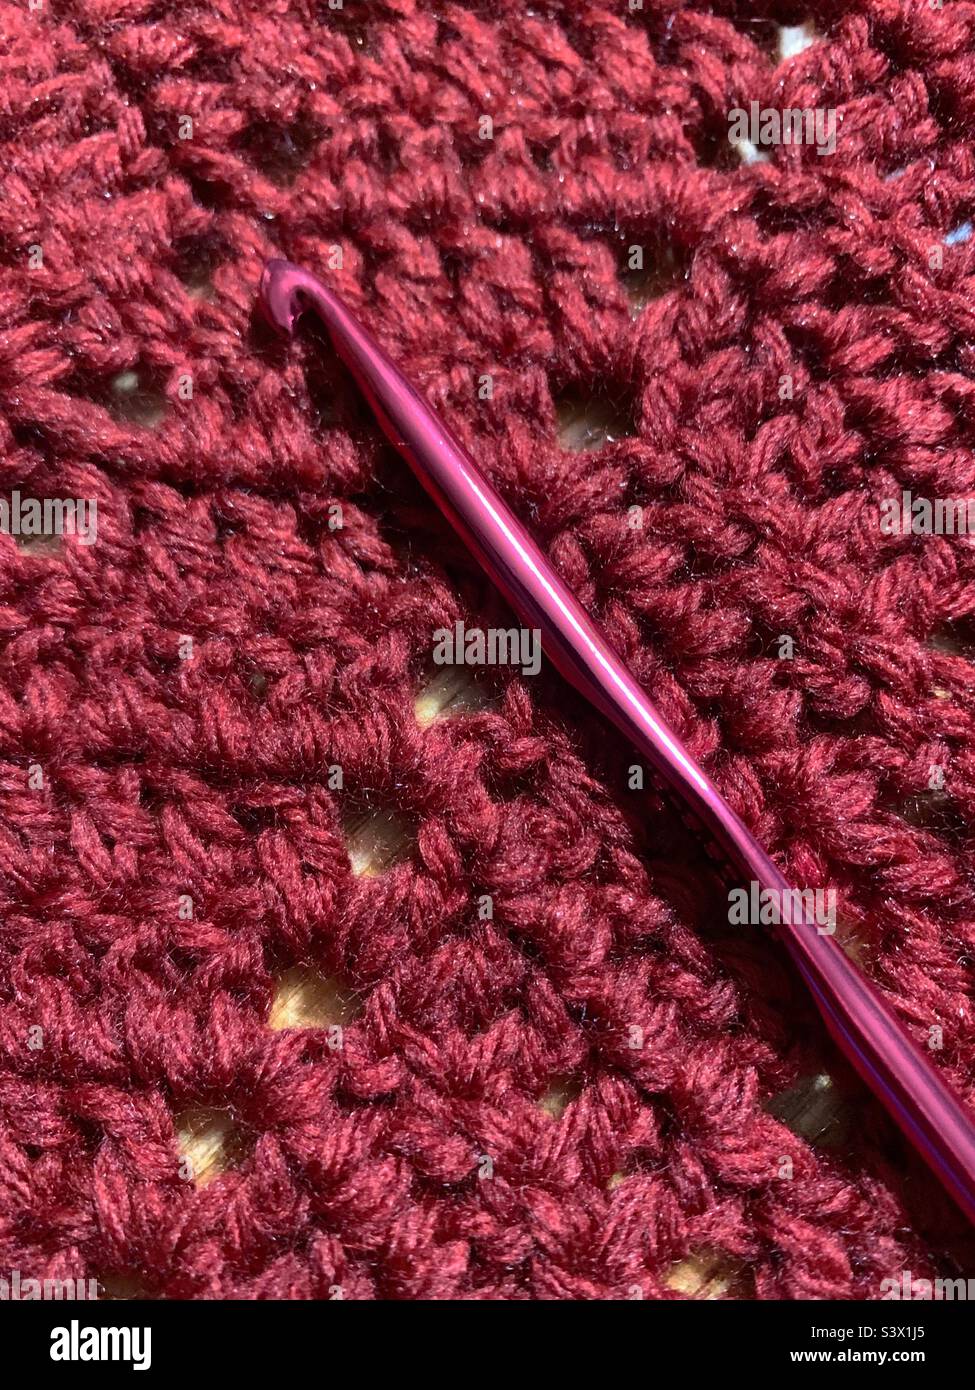 Rust-coloured crocheted blanket in chevron pattern with red aluminum crochet hook Stock Photo